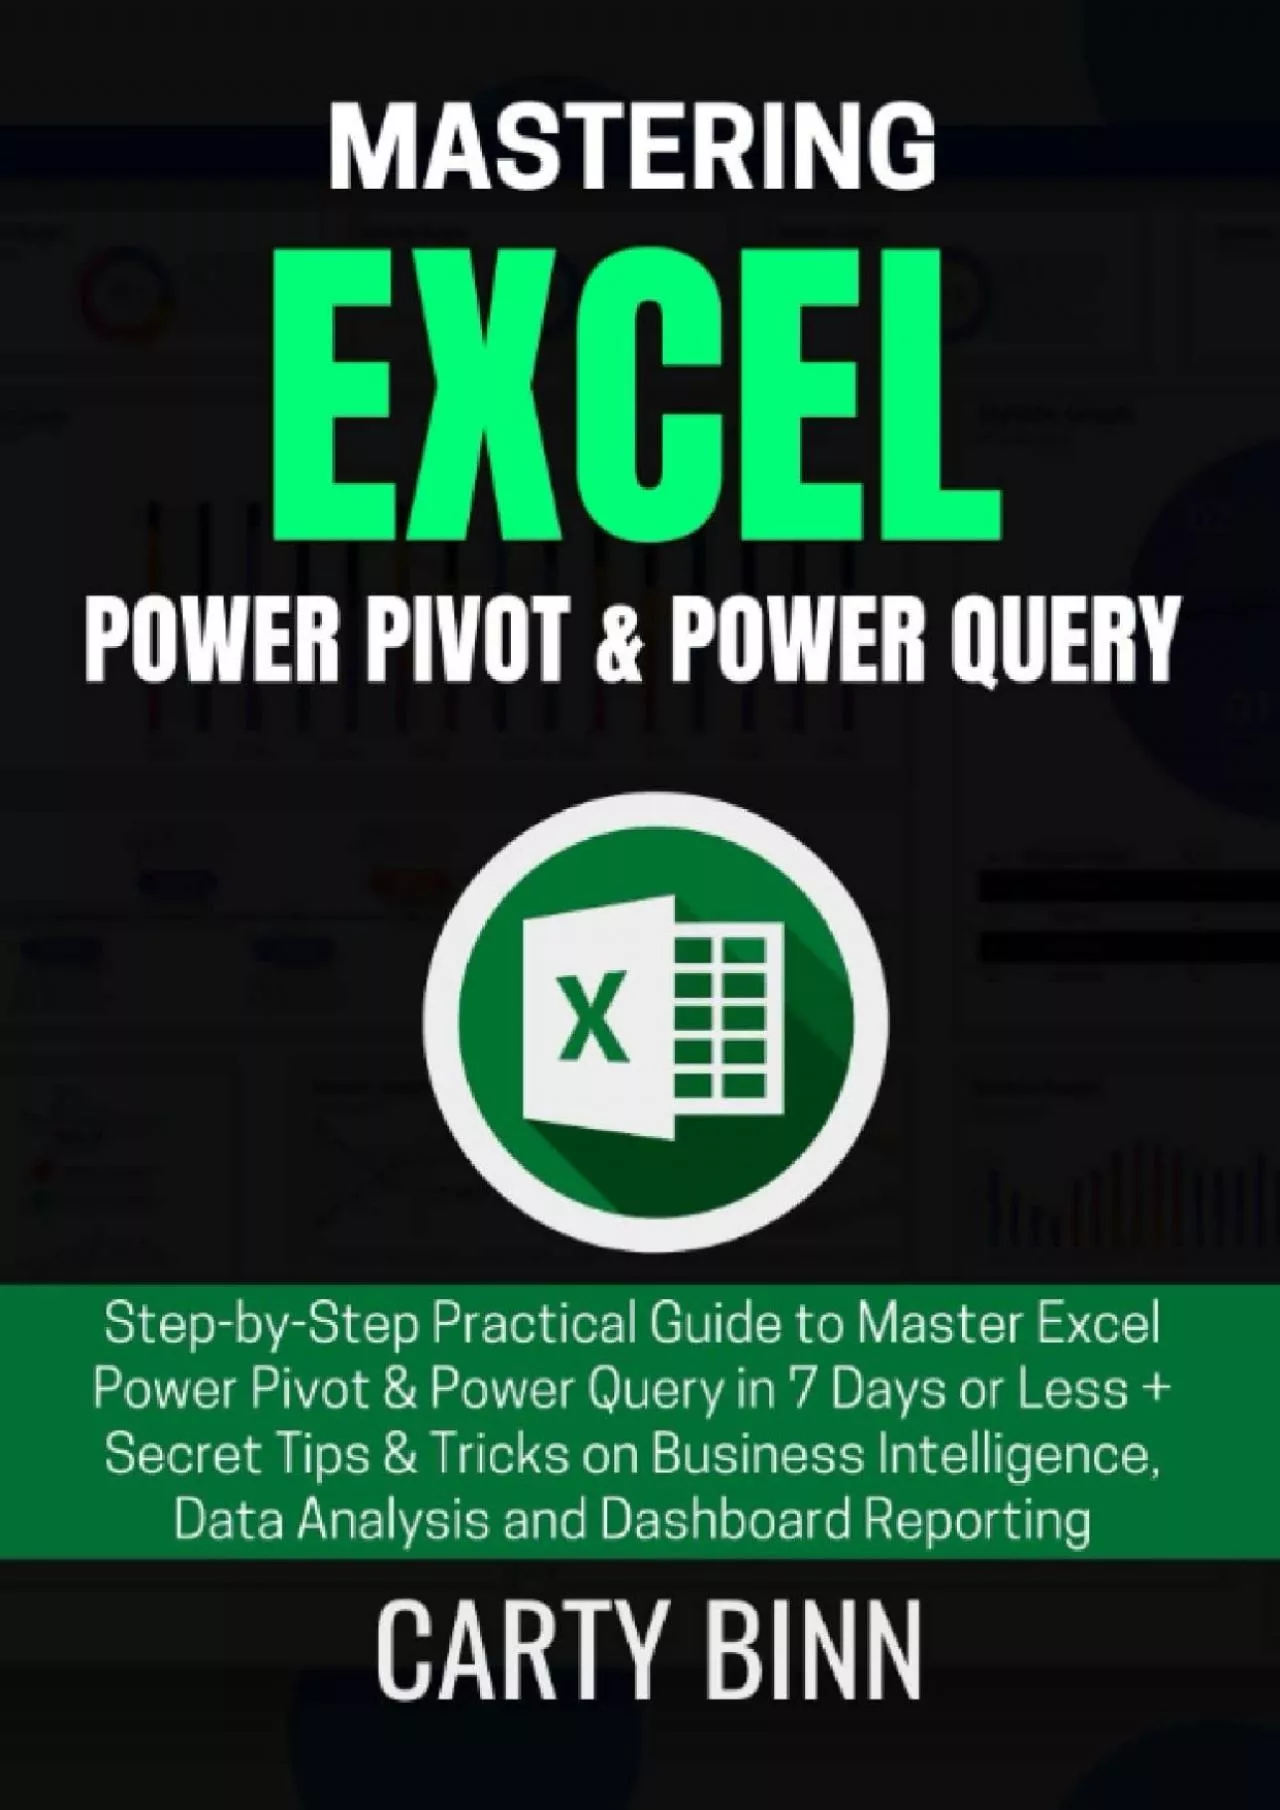 MASTERING EXCEL POWER PIVOT & POWER QUERY: Step-by-Step Practical Guide to Master Excel